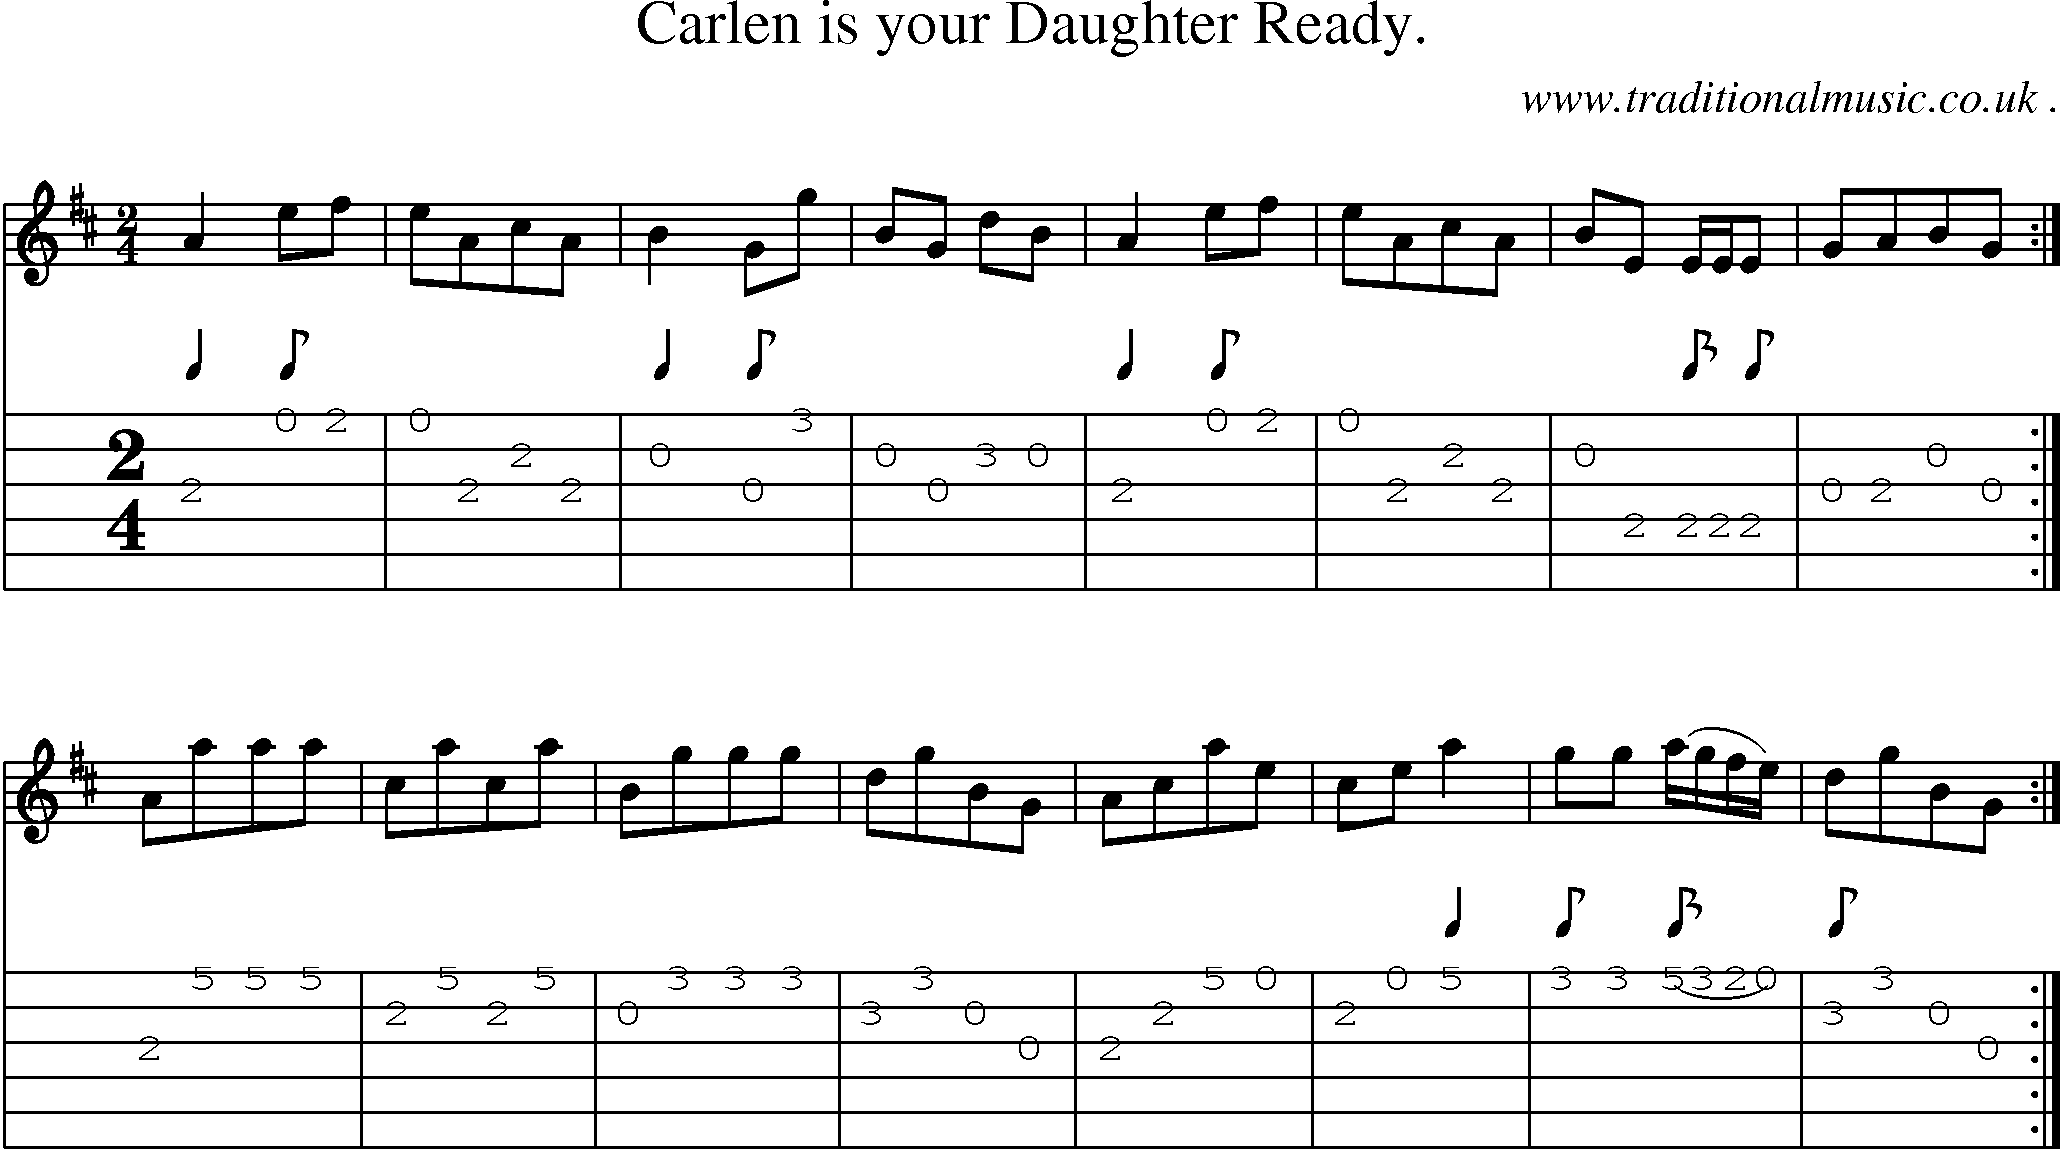 Sheet-Music and Guitar Tabs for Carlen is your Daughter Ready